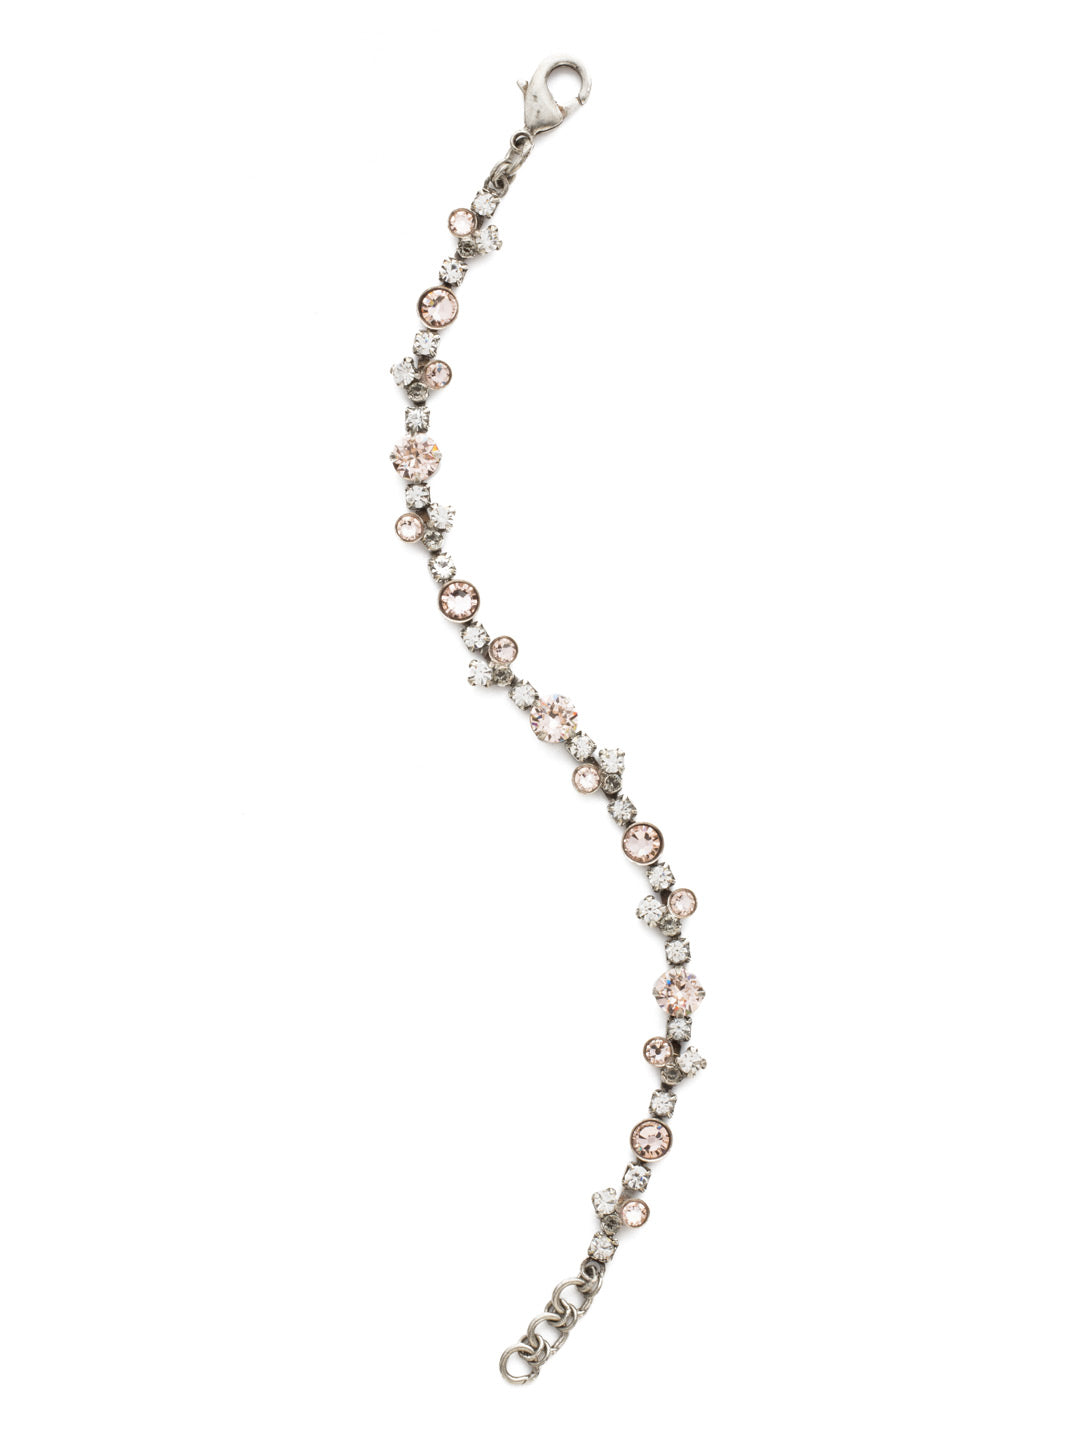 Modern Crystal Tennis Bracelet - BCW11ASSNB - <p>Our take on the classic tennis bracelet. Featuring multi-sized round crystals, this petite bracelet is sure to become your go-to piece. From Sorrelli's Snow Bunny collection in our Antique Silver-tone finish.</p>